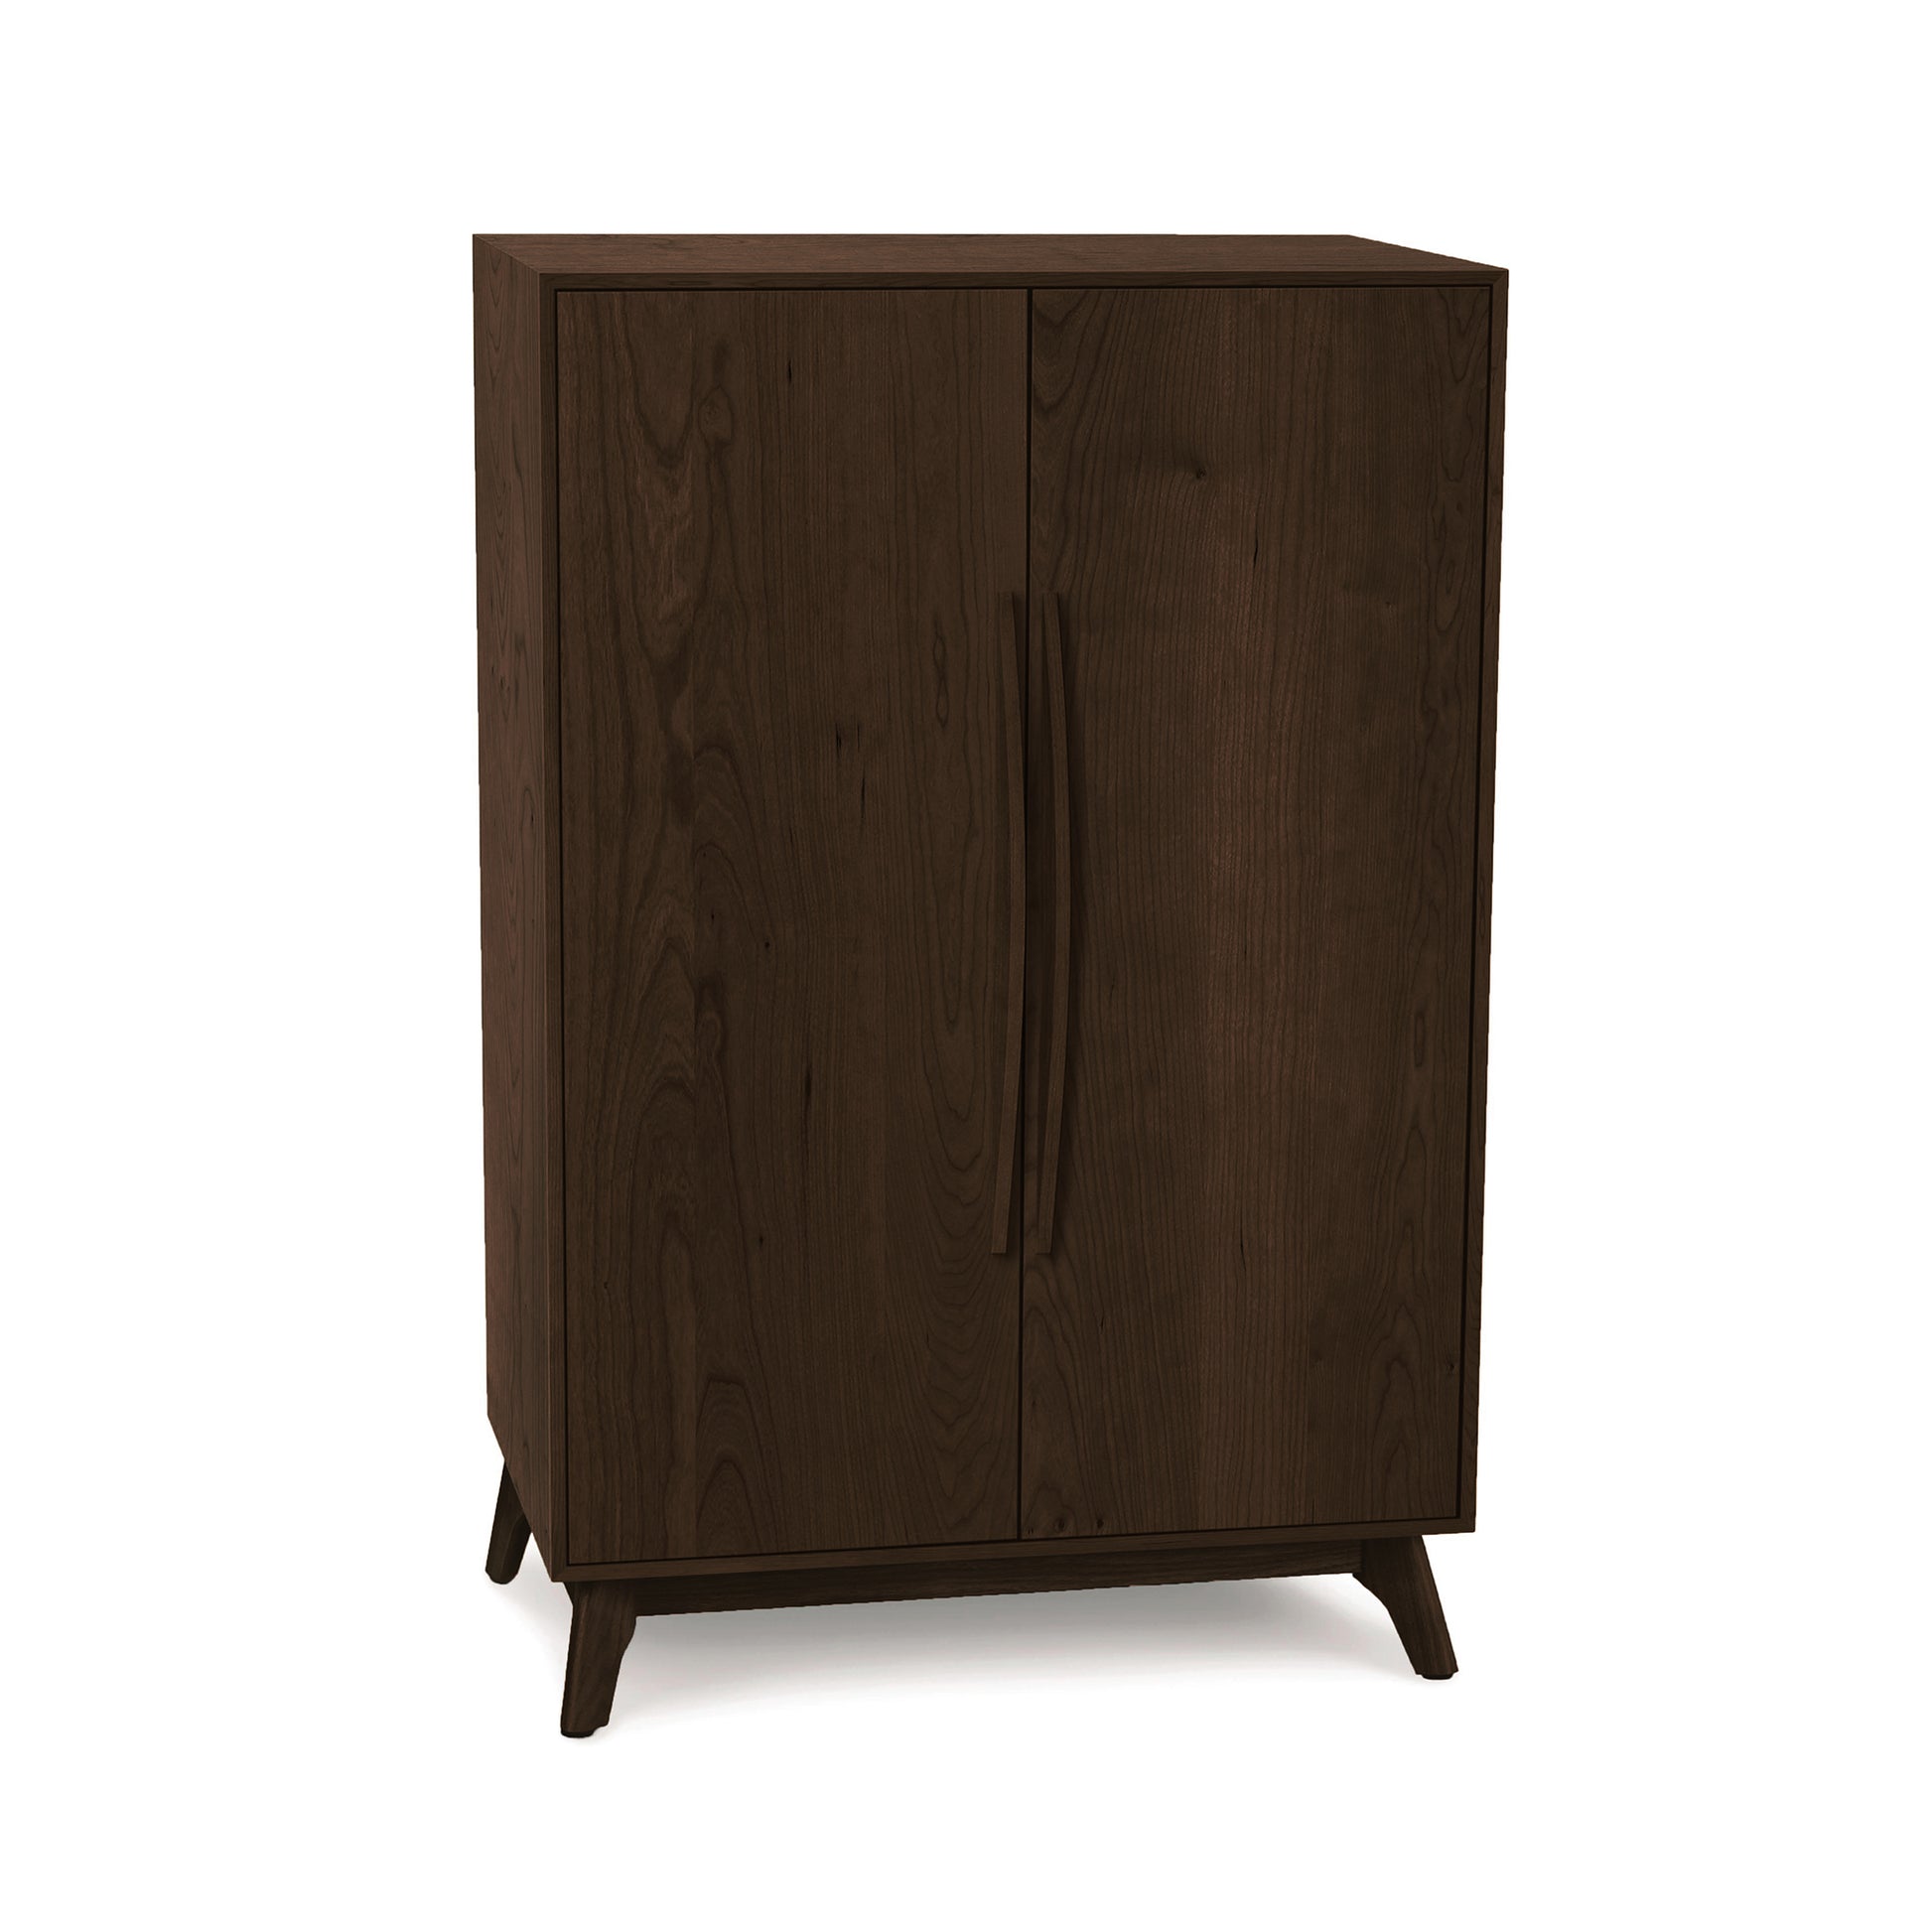 A Copeland Furniture Catalina Bar Cabinet with closed doors and angled legs on a white background, designed for wine storage.